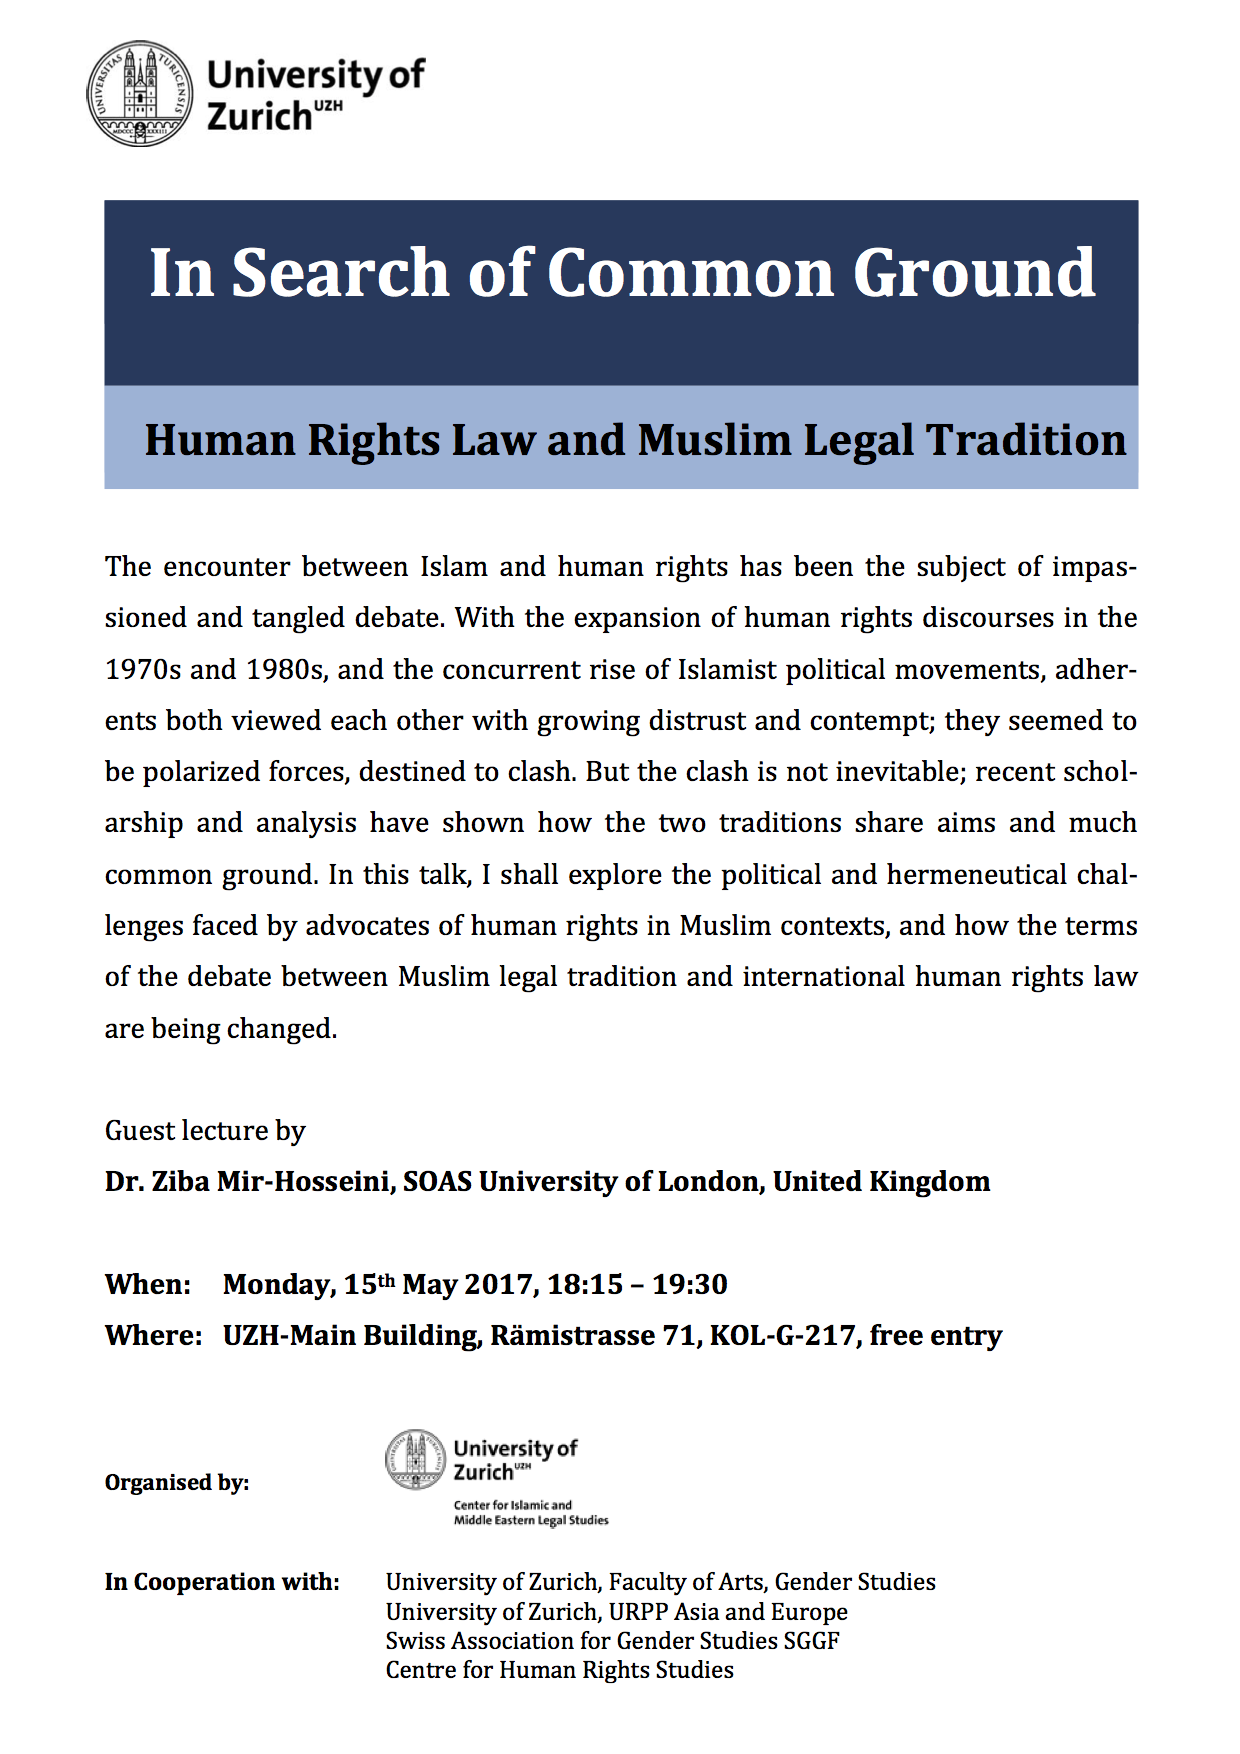 In Search of Common Ground: Human Rights Law and Muslim Legal Tradition